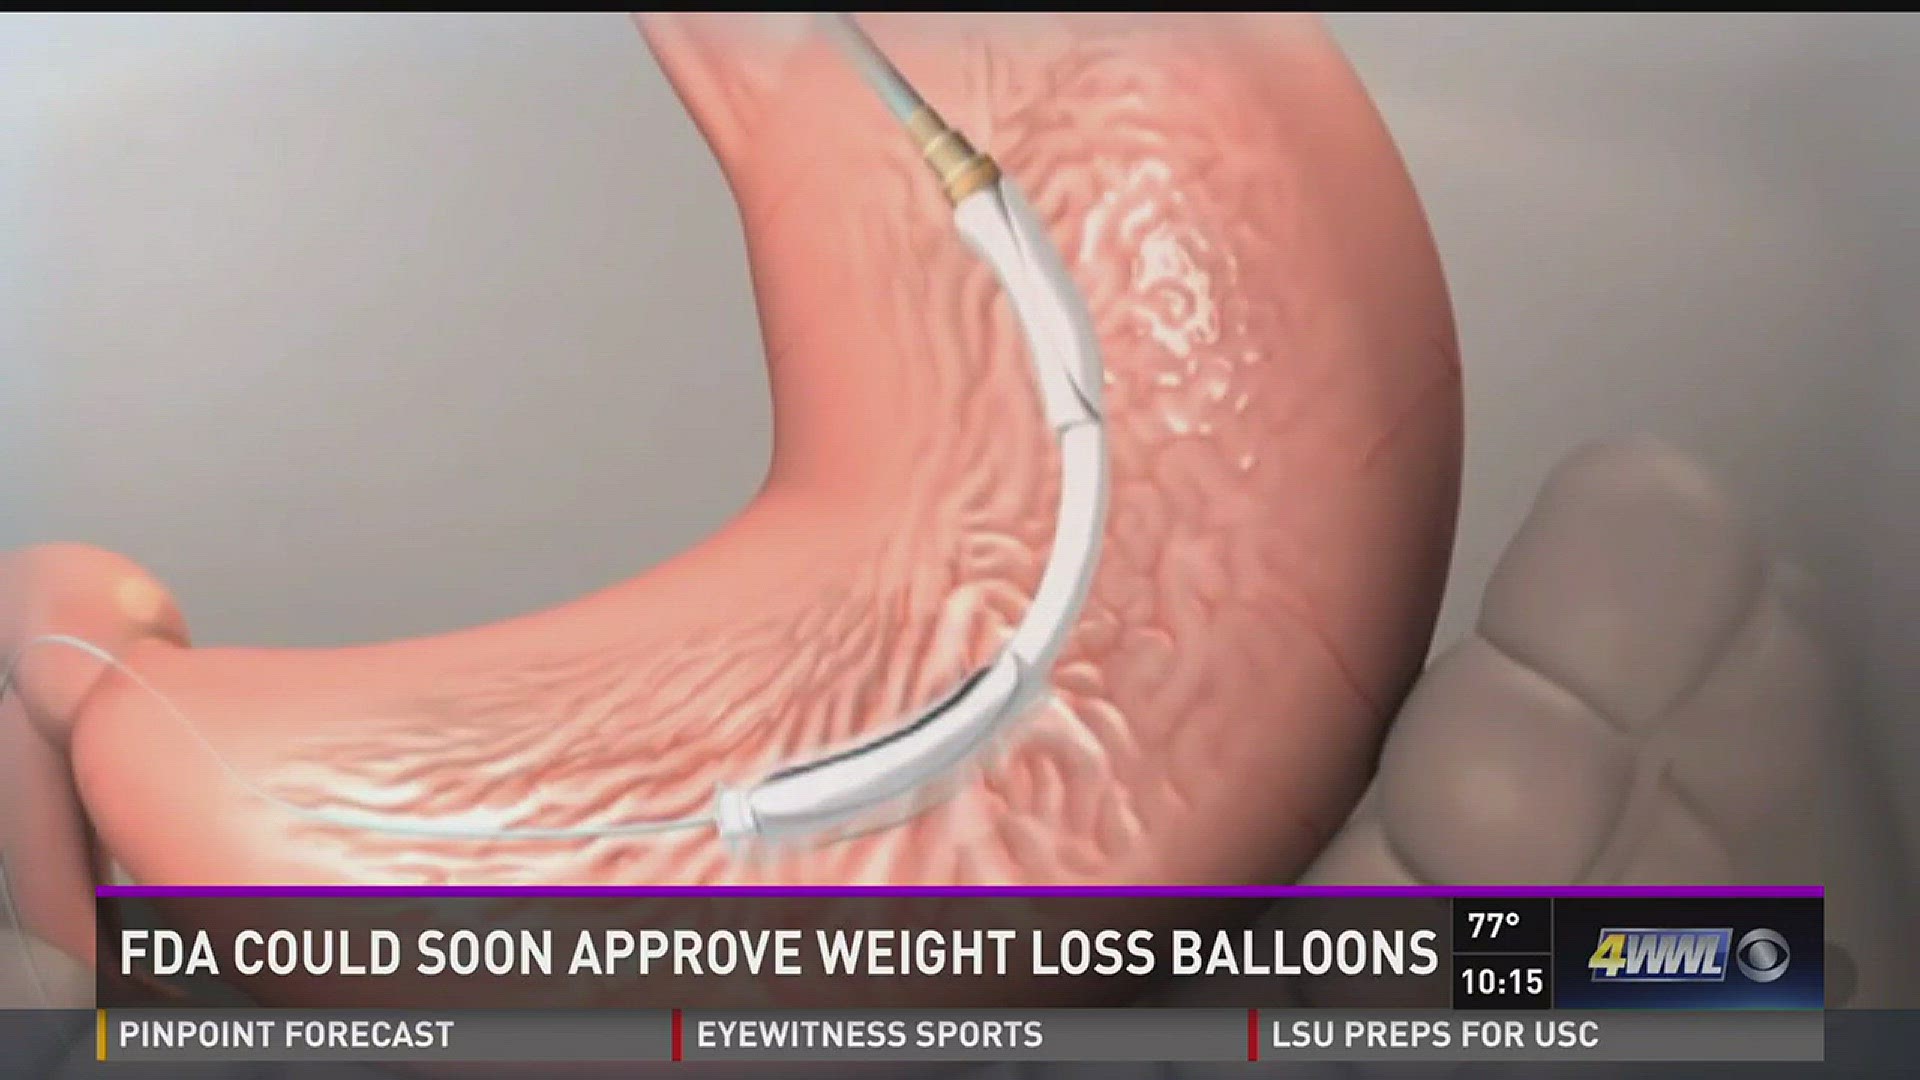 You've heard of weight loss surgery for obesity, but any day now, a new device to help people who are overweight could get FDA approval.